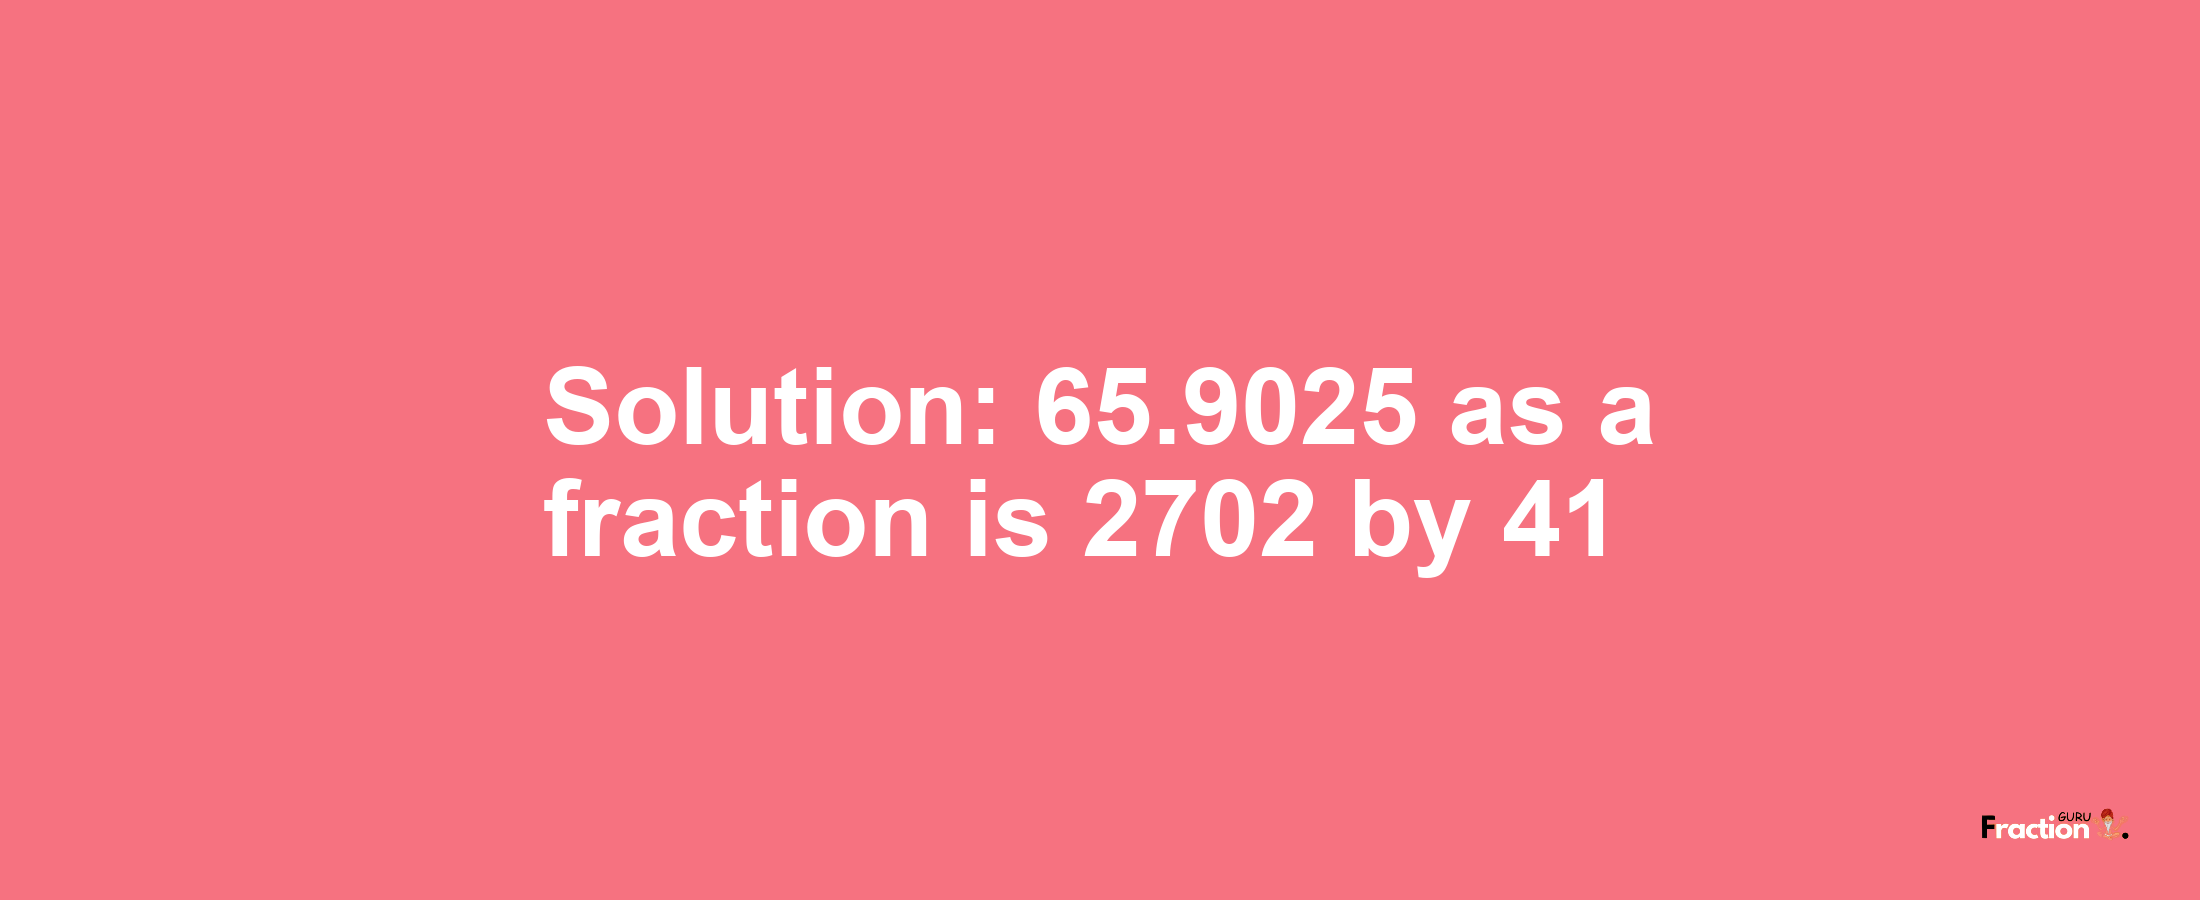 Solution:65.9025 as a fraction is 2702/41